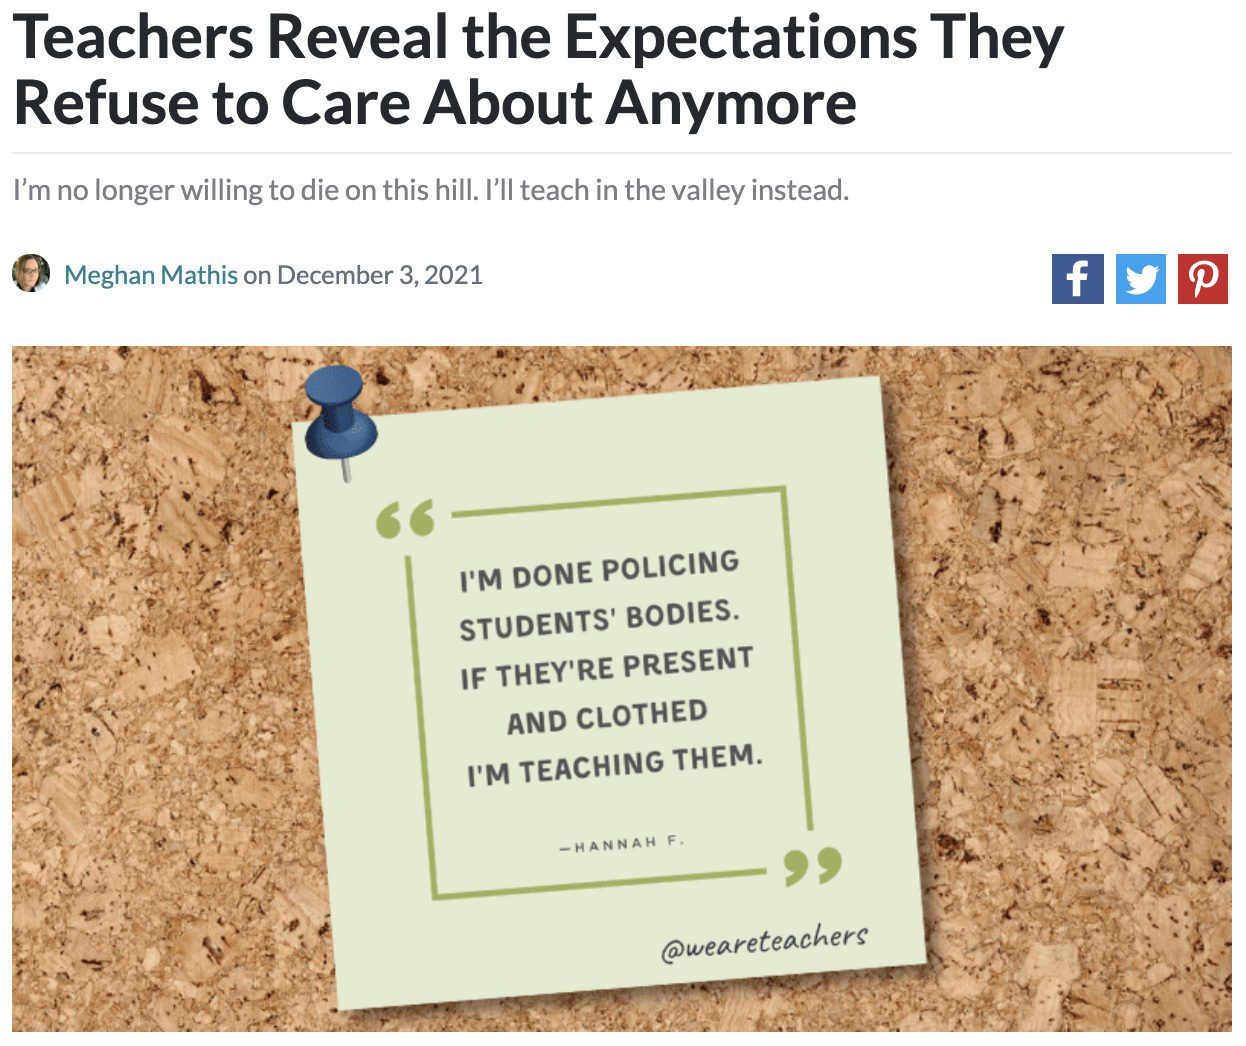 Screencap of an article about expectations teachers refuse to care about